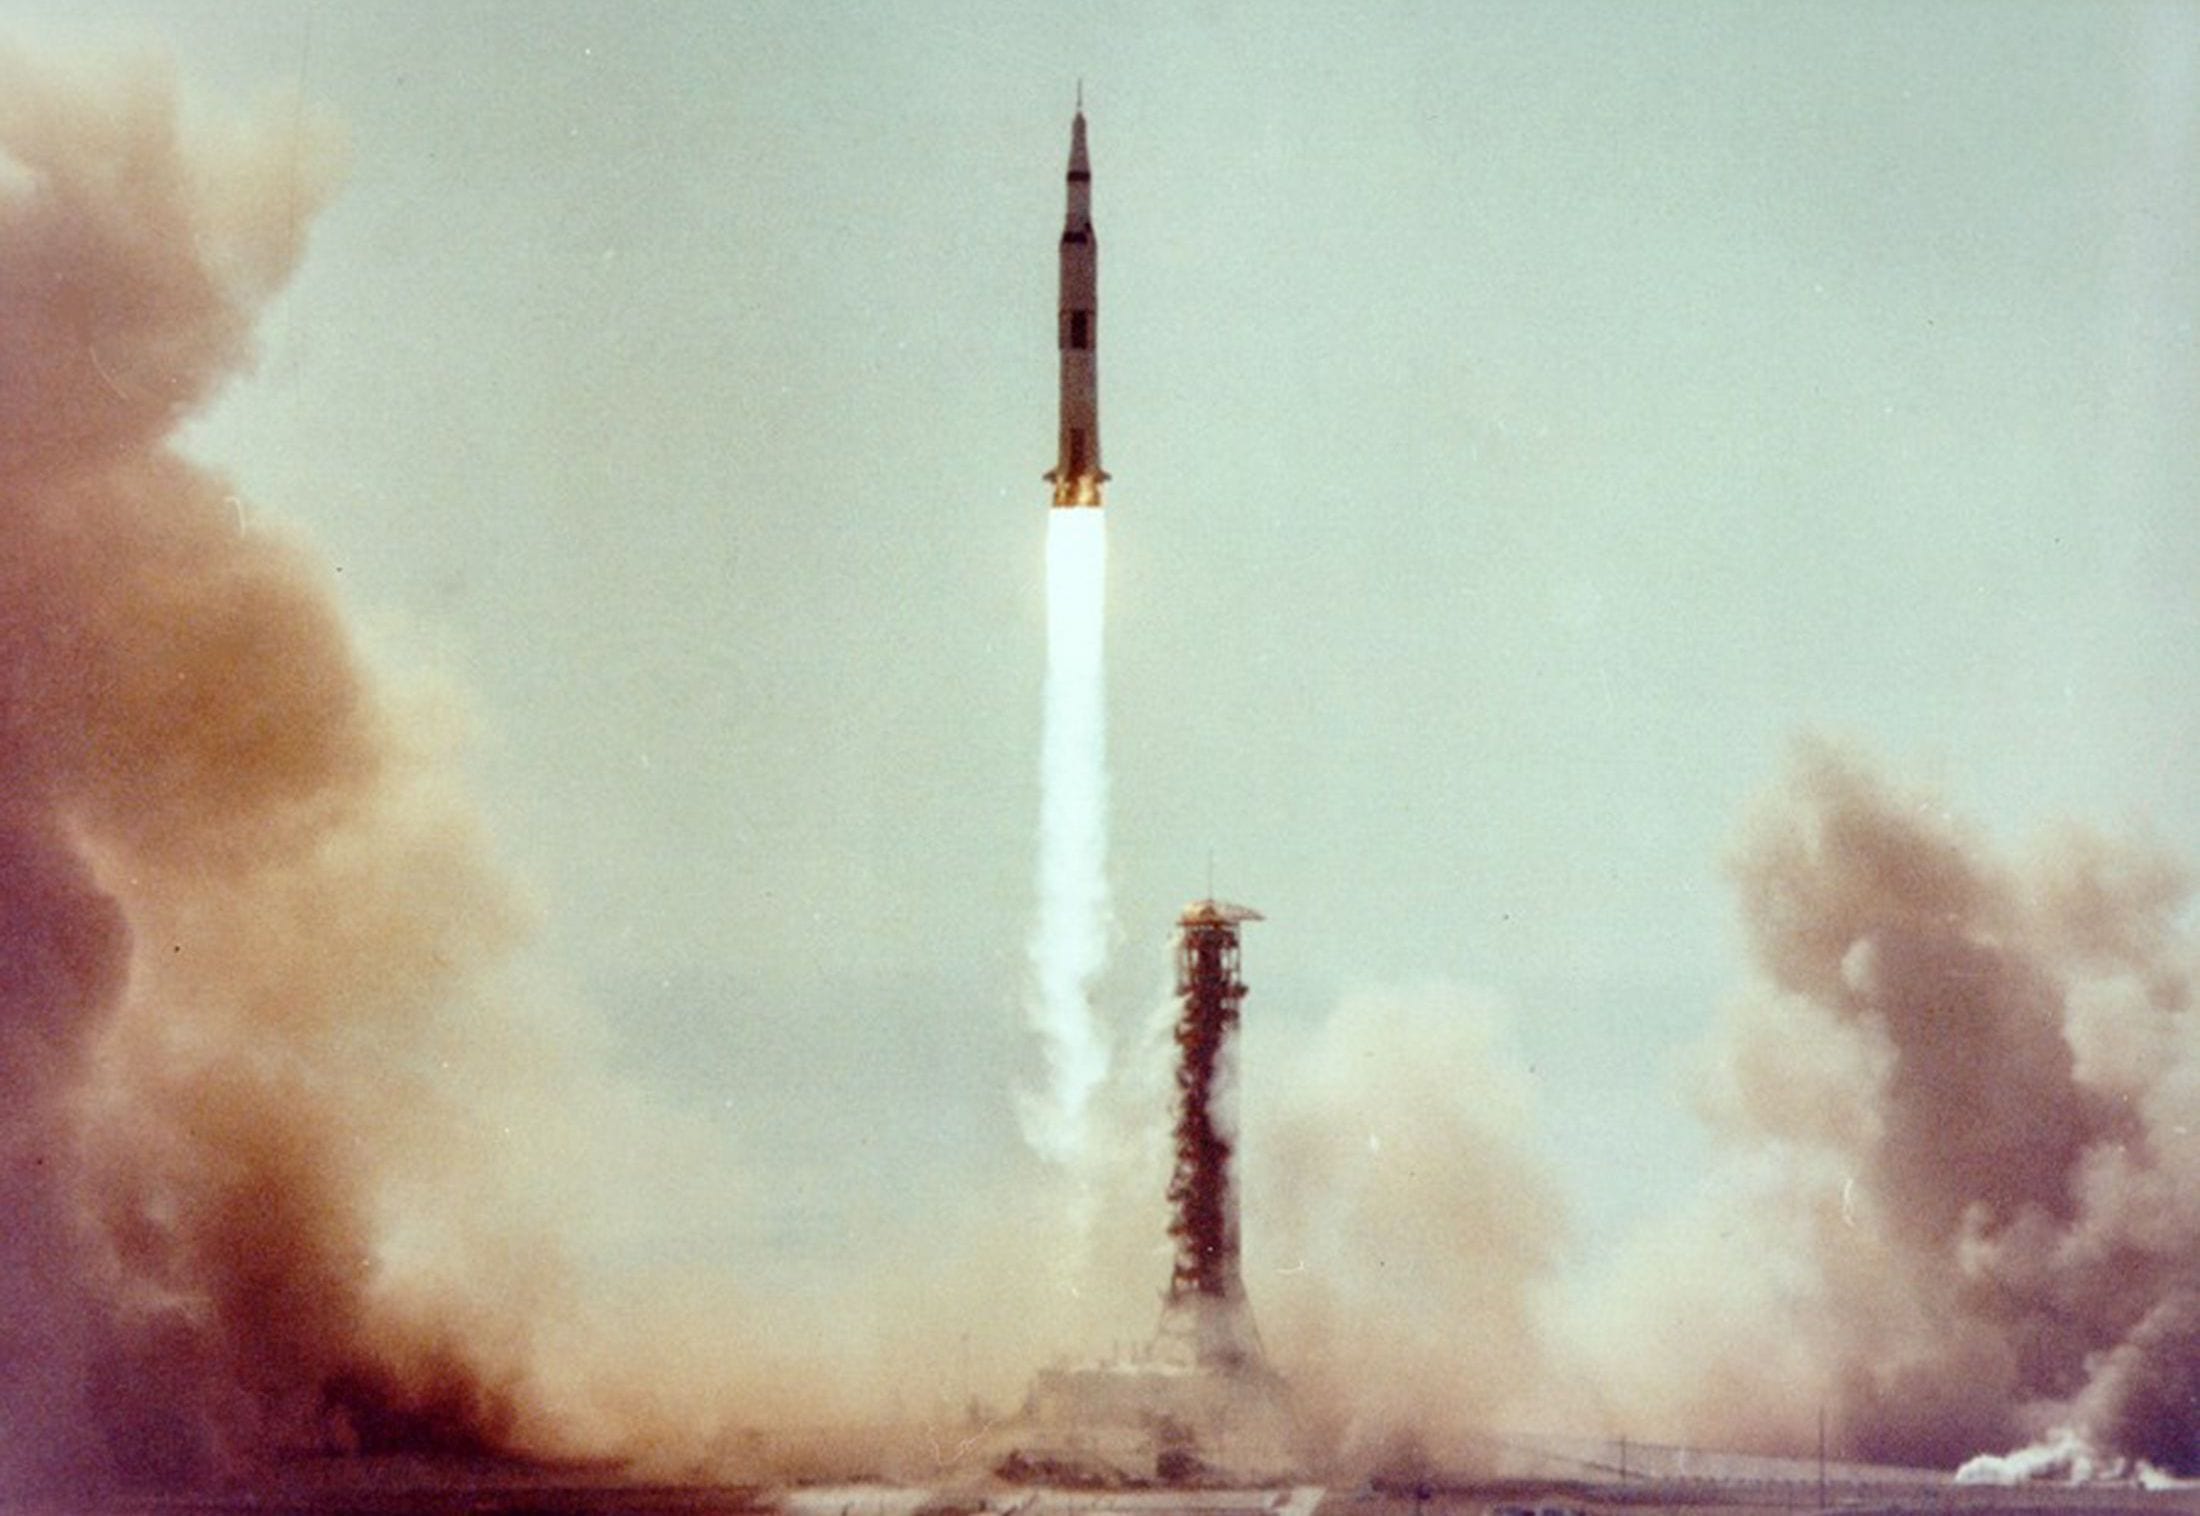 ICYMI: A Last-Minute Fix, Hours Before Apollo 11 Blasted to the Moon